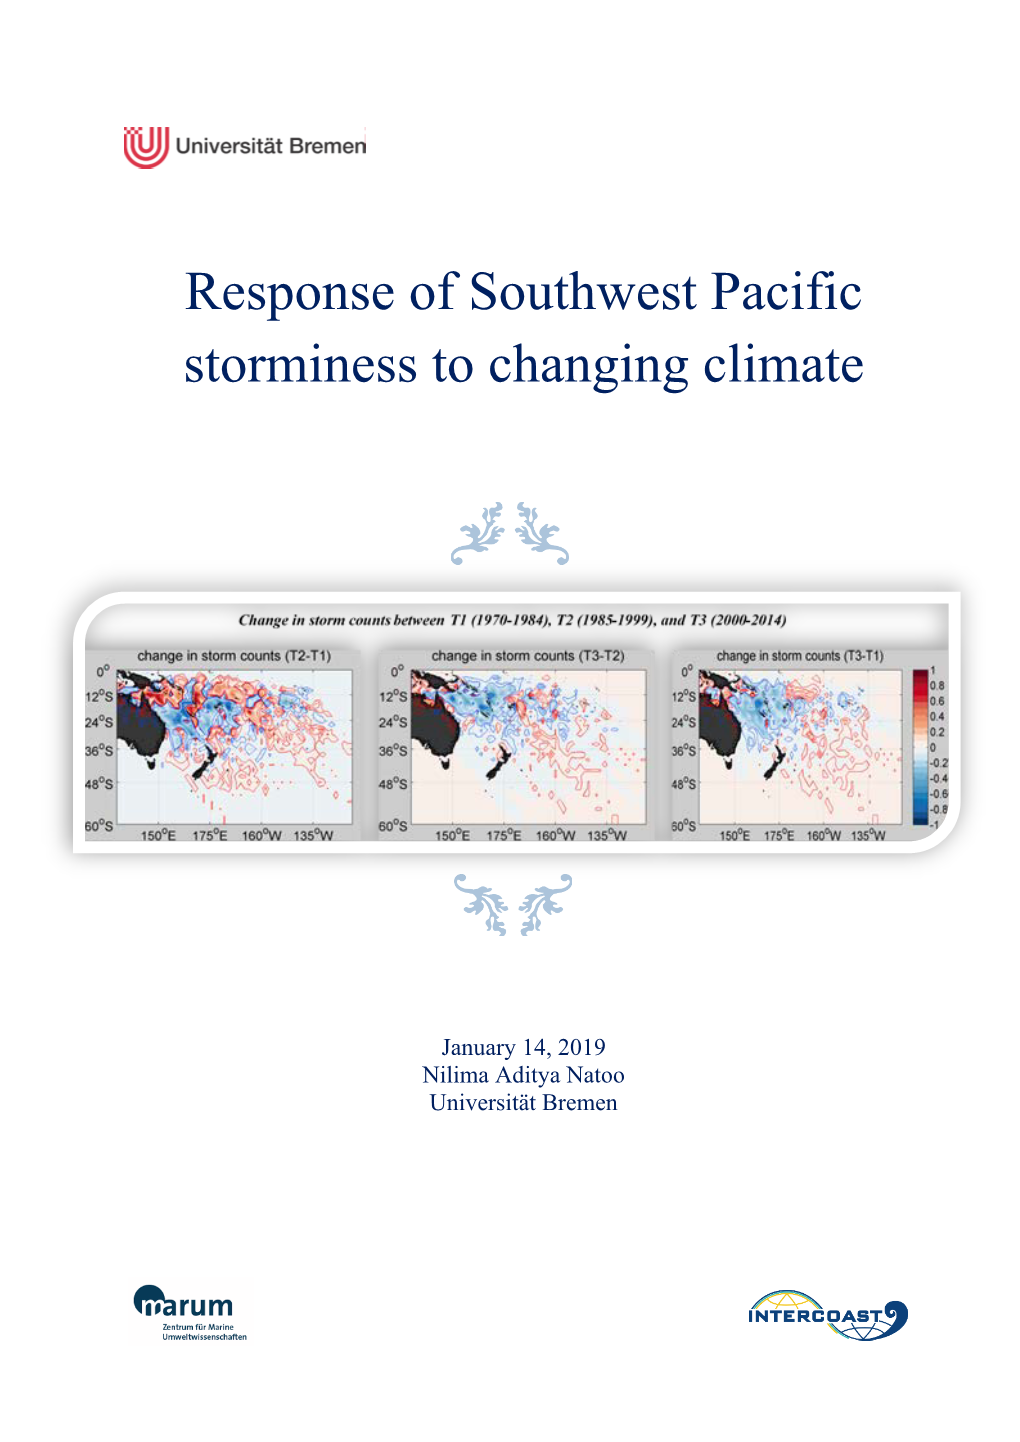 Response of Southwest Pacific Storminess to Changing Climate